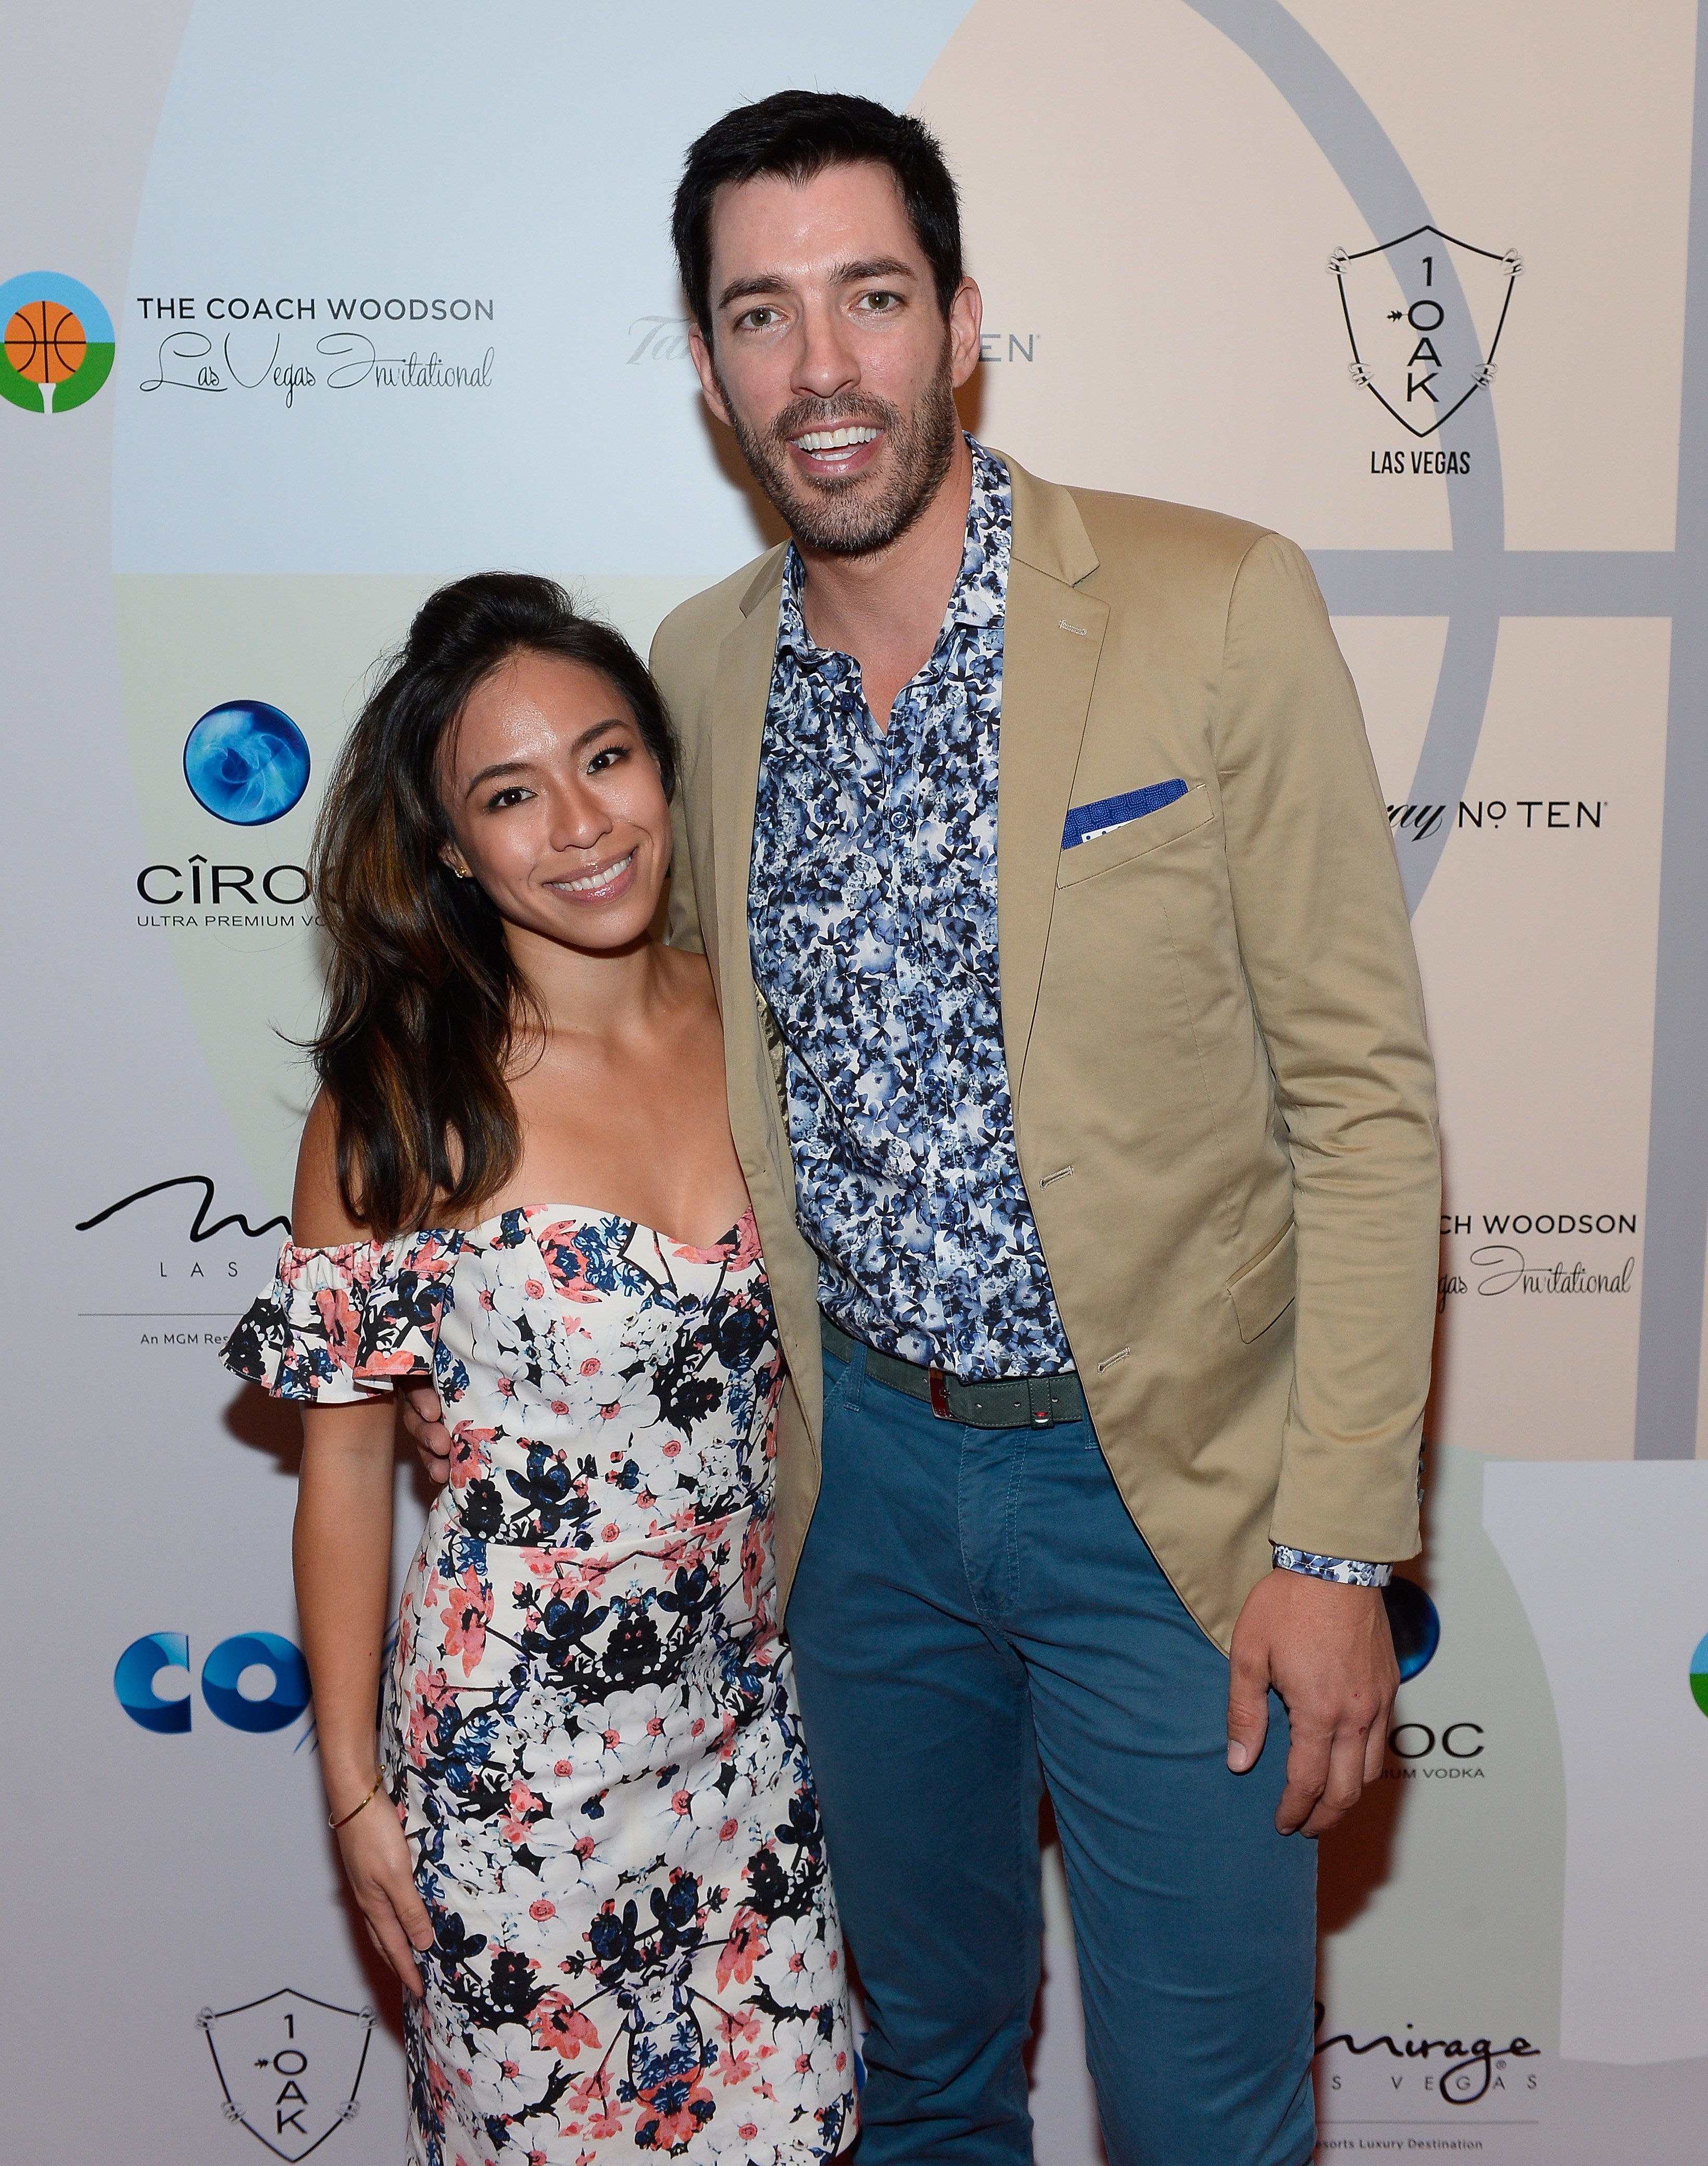 Linda Phan and Drew Scott at the Coach Woodson Las Vegas Invitational red carpet and pairings gala. | Source: Getty Images